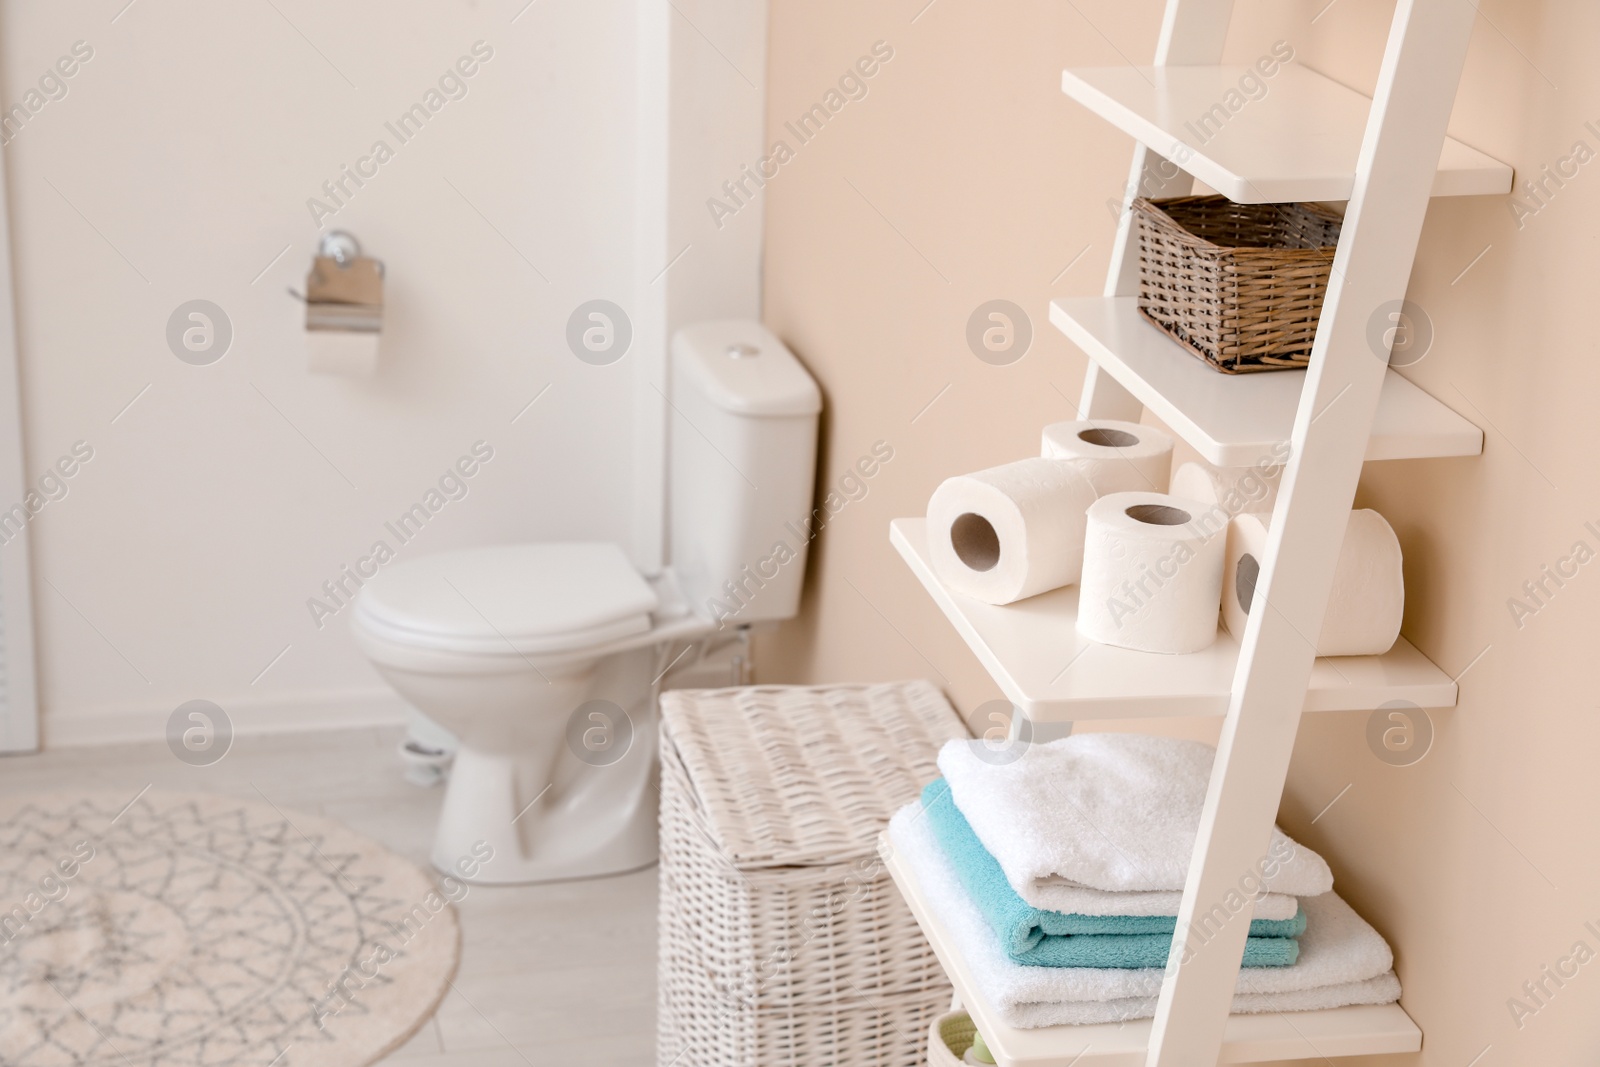 Photo of Toilet paper rolls on shelving unit in bathroom. Space for text